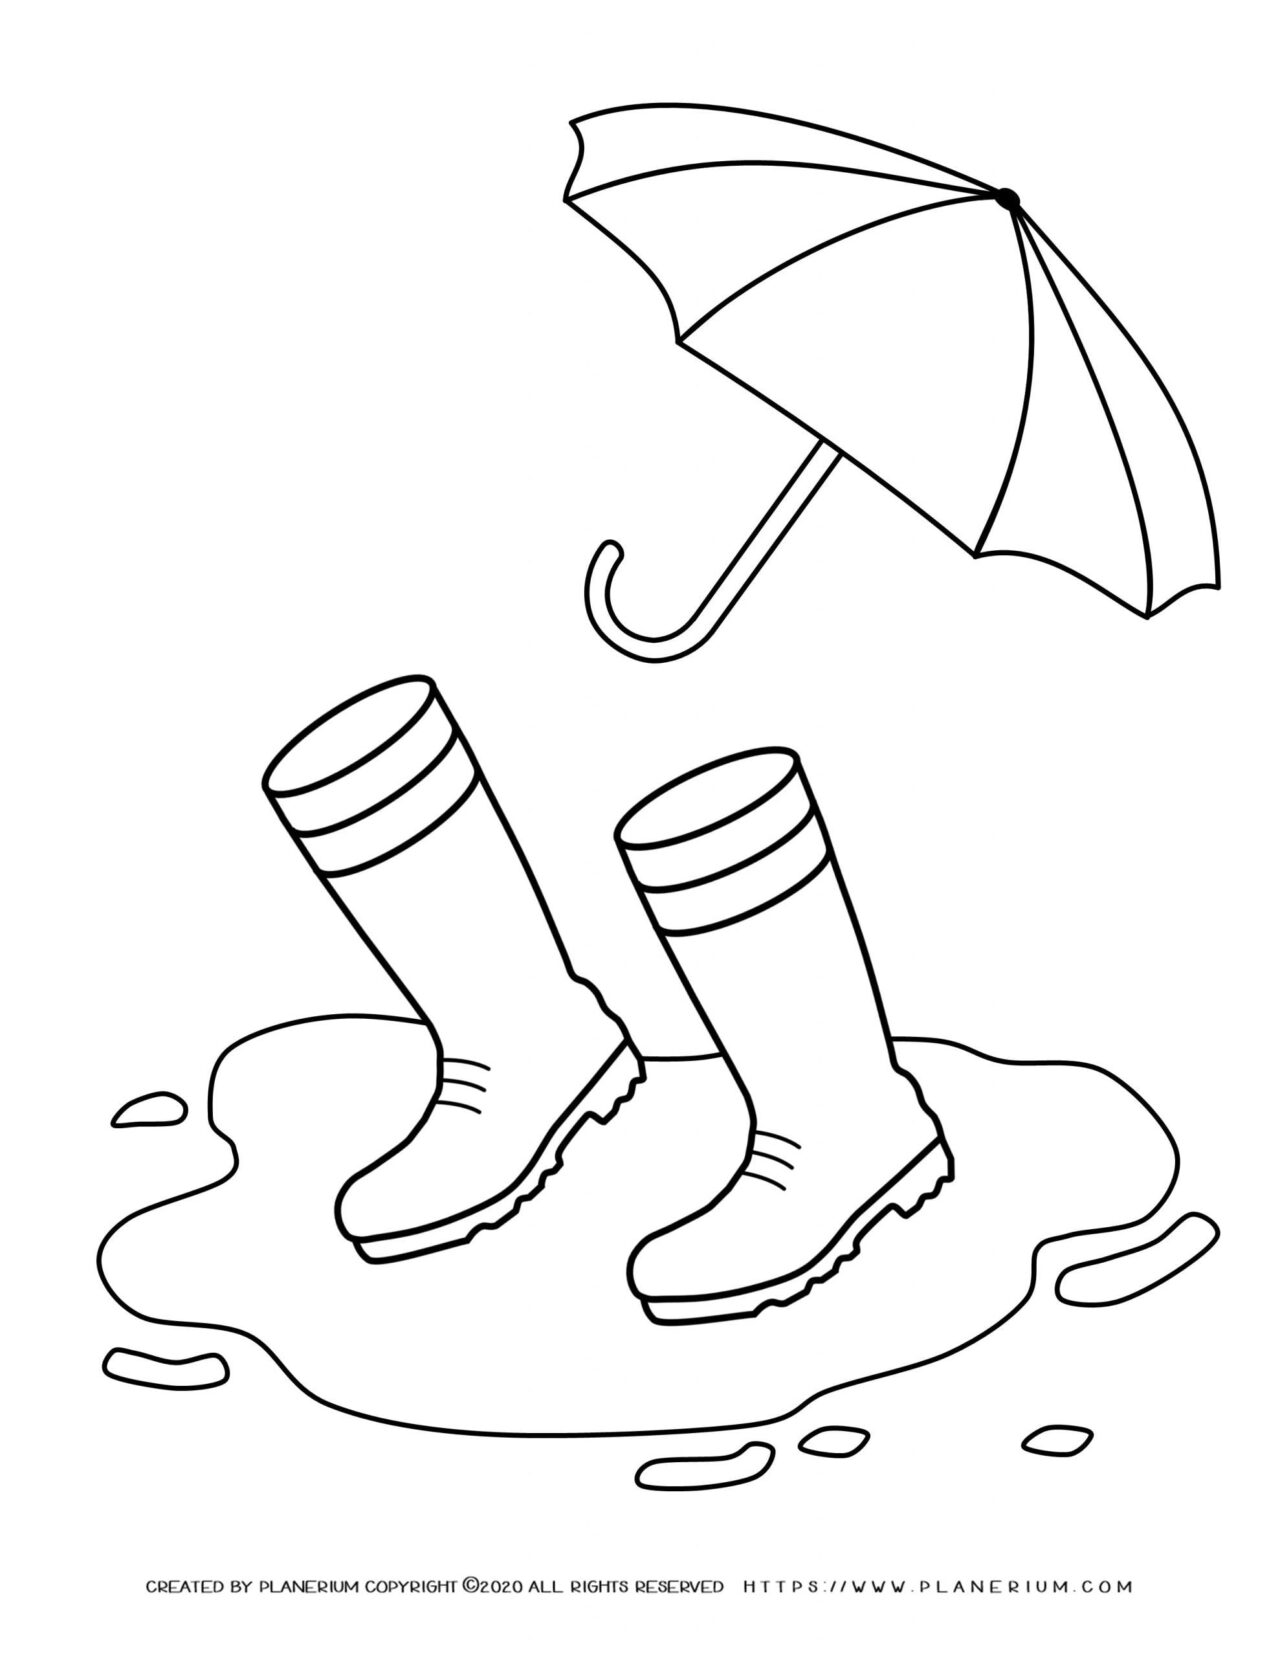 Spring coloring page - Boots in the pond